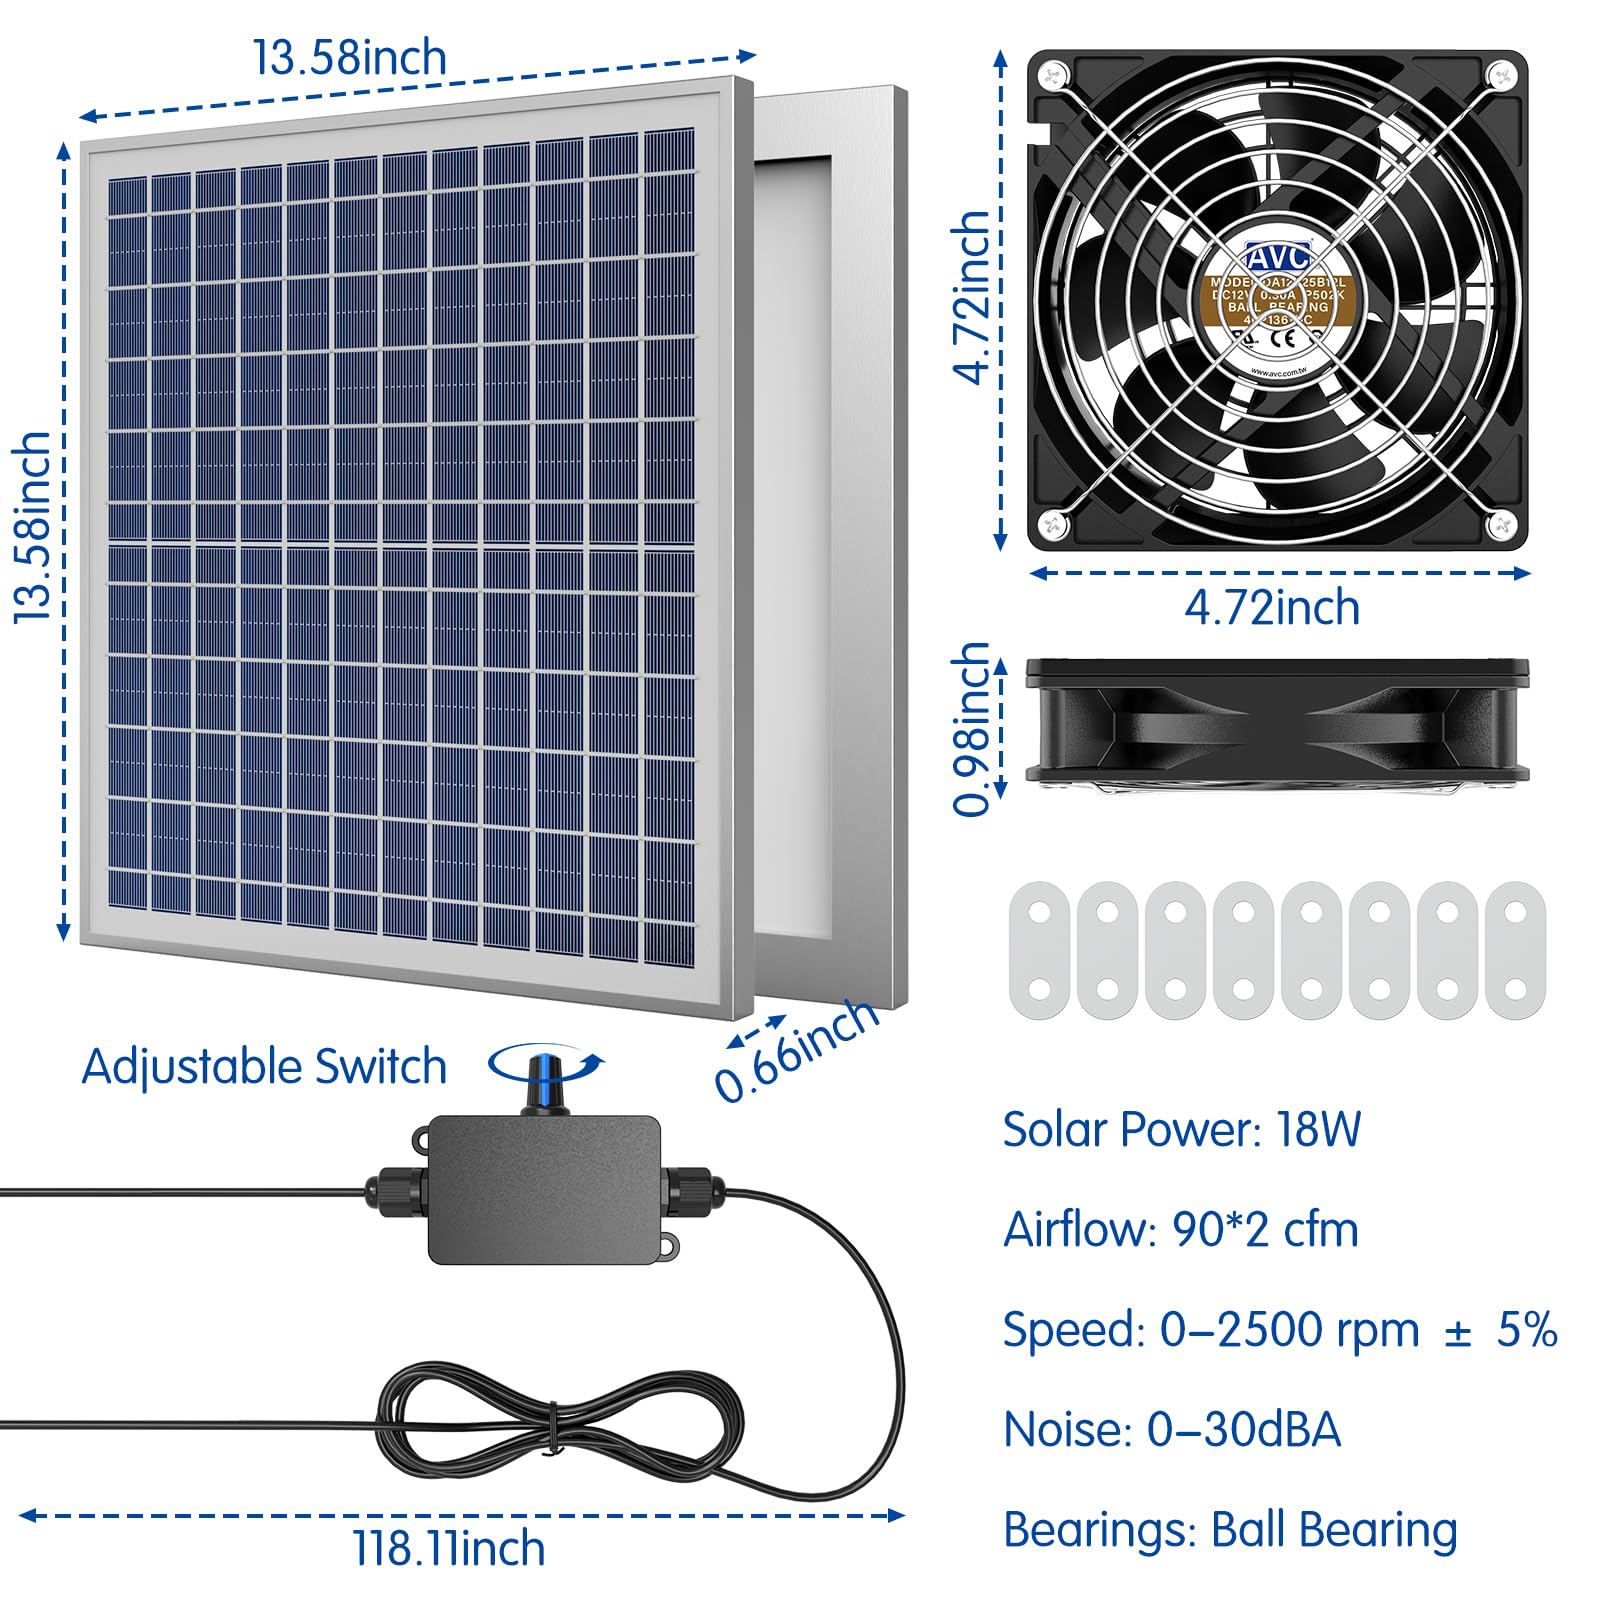 Neijiaer Solar Powered Fan, 18W Solar Fans with 10FT/3m Cable and Adjustable Switch for Outside, Waterproof Solar Fan for Chicken Coop, Greenhouse, Pet House, Shed